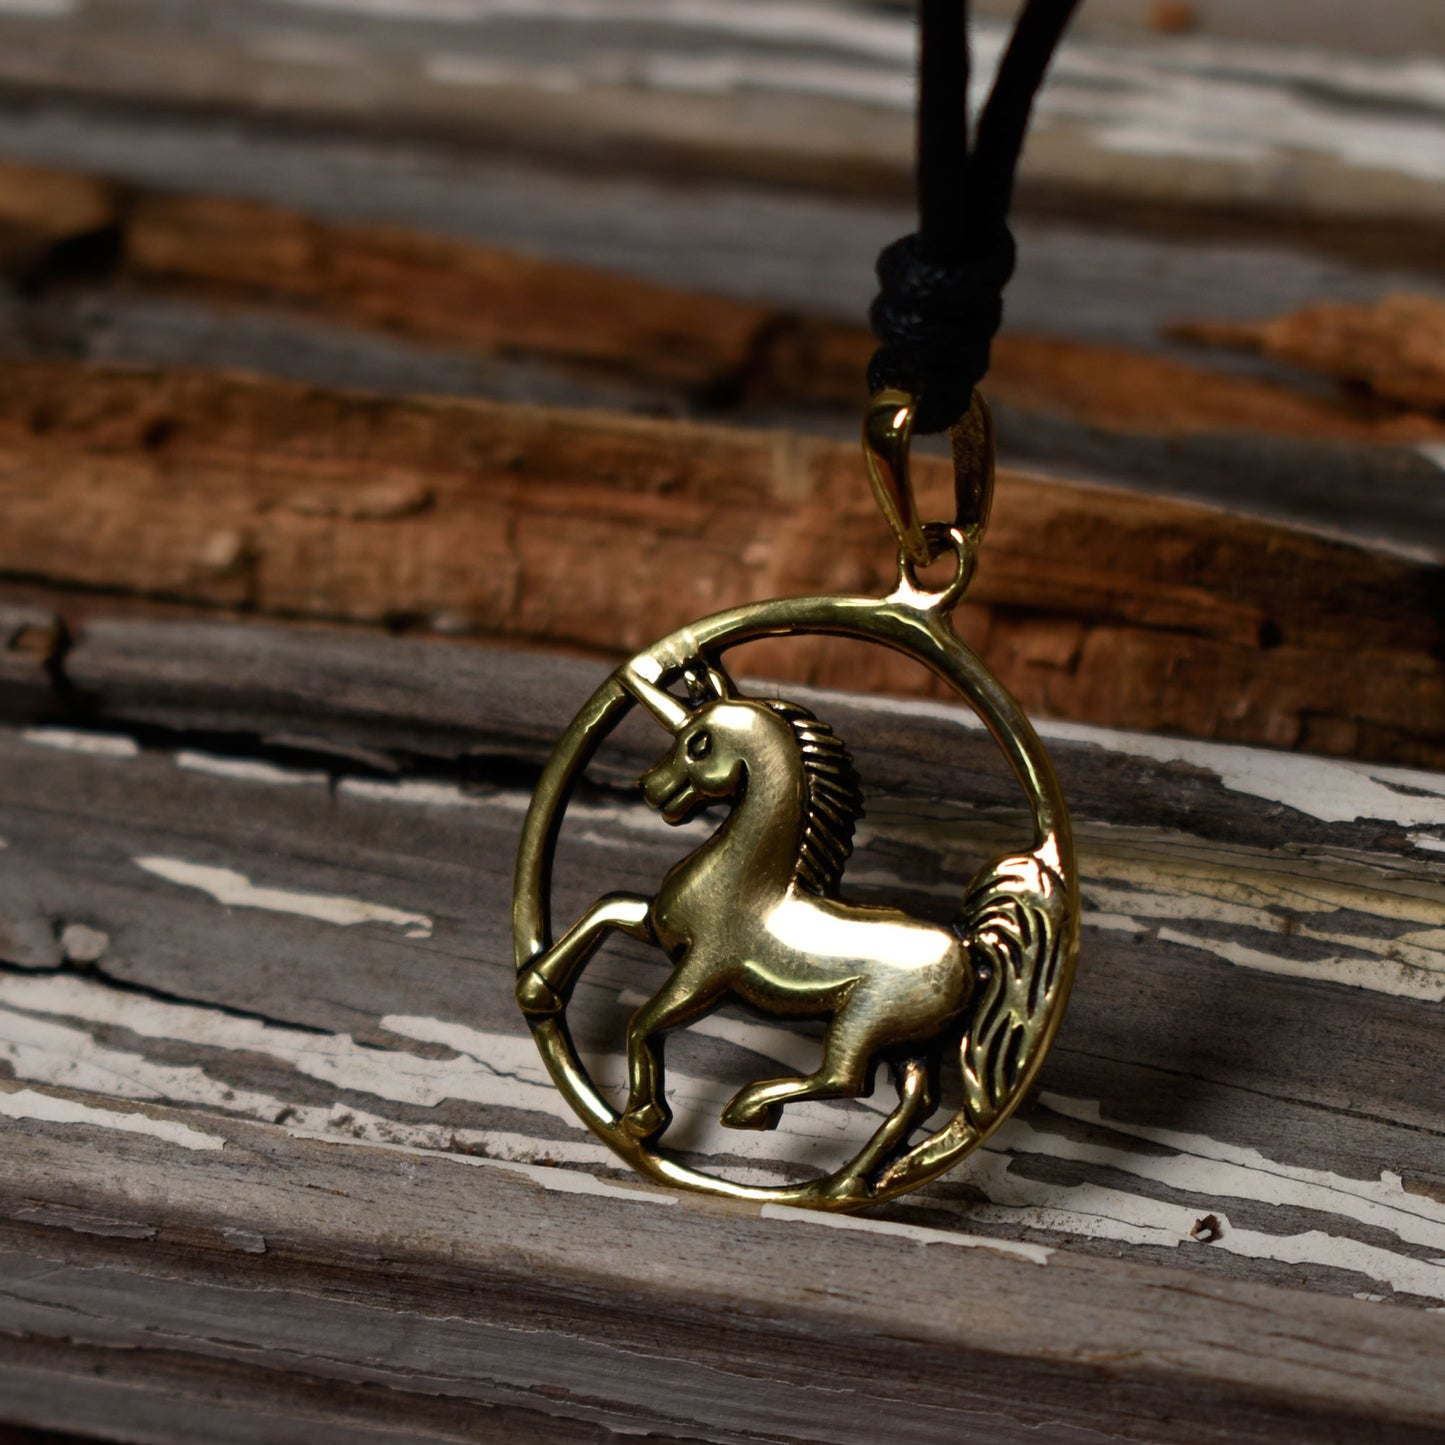 Unicorn 92.5 Sterling Siver Pewter Gold Brass Charm Necklace Pendant Jewelry